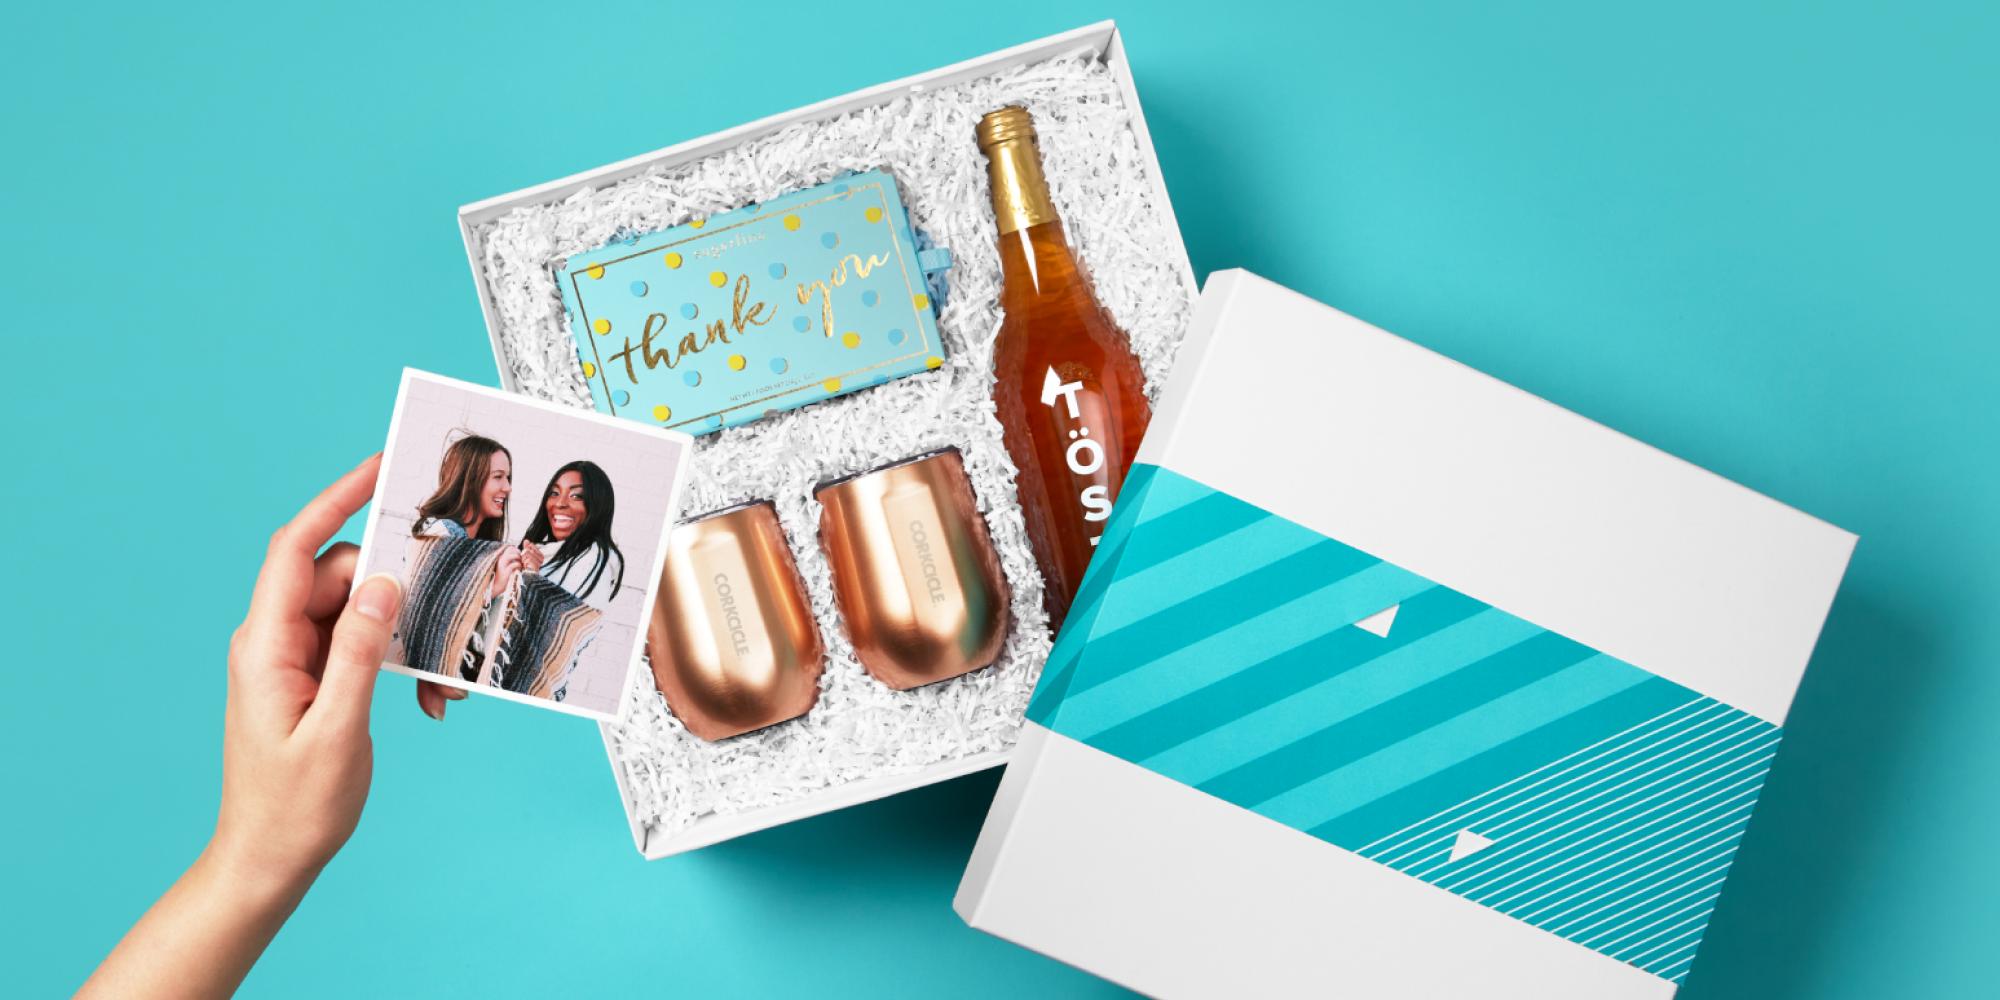 Curated Gift Boxes & Personalized Gifts